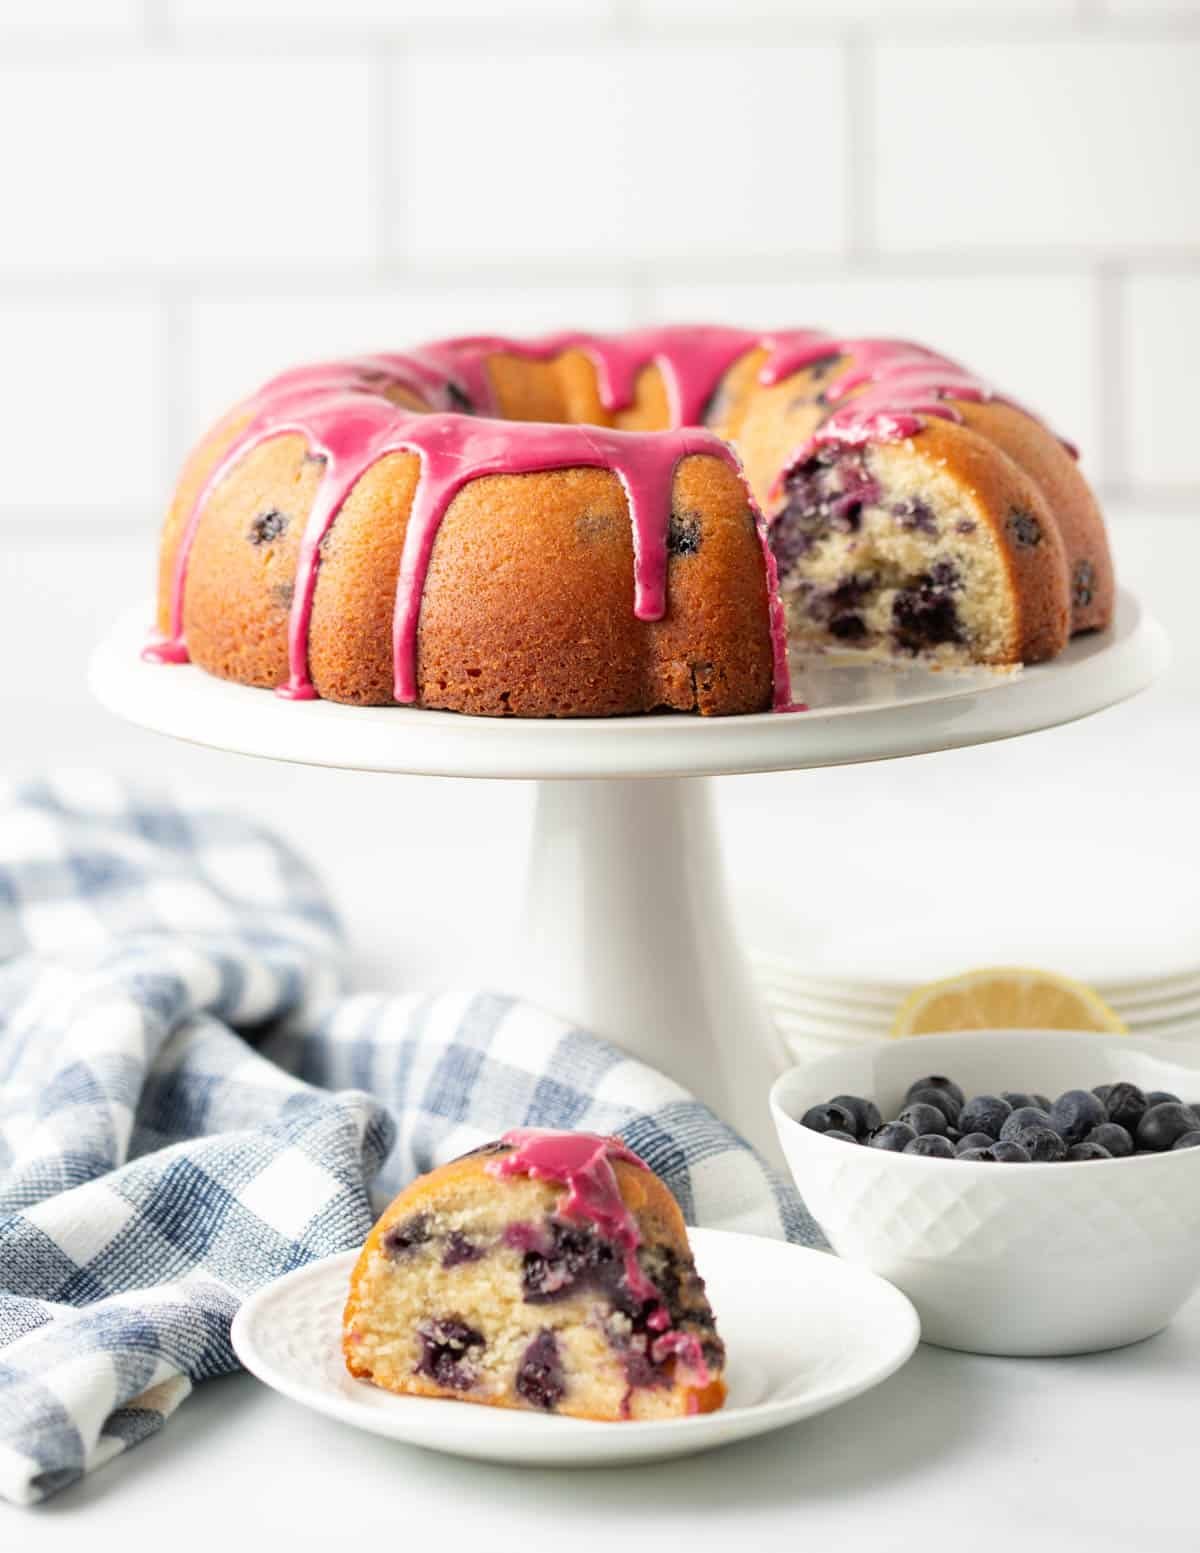 Vegan Blueberry bundt cake on a cake stand with a slice in front on a plate.
